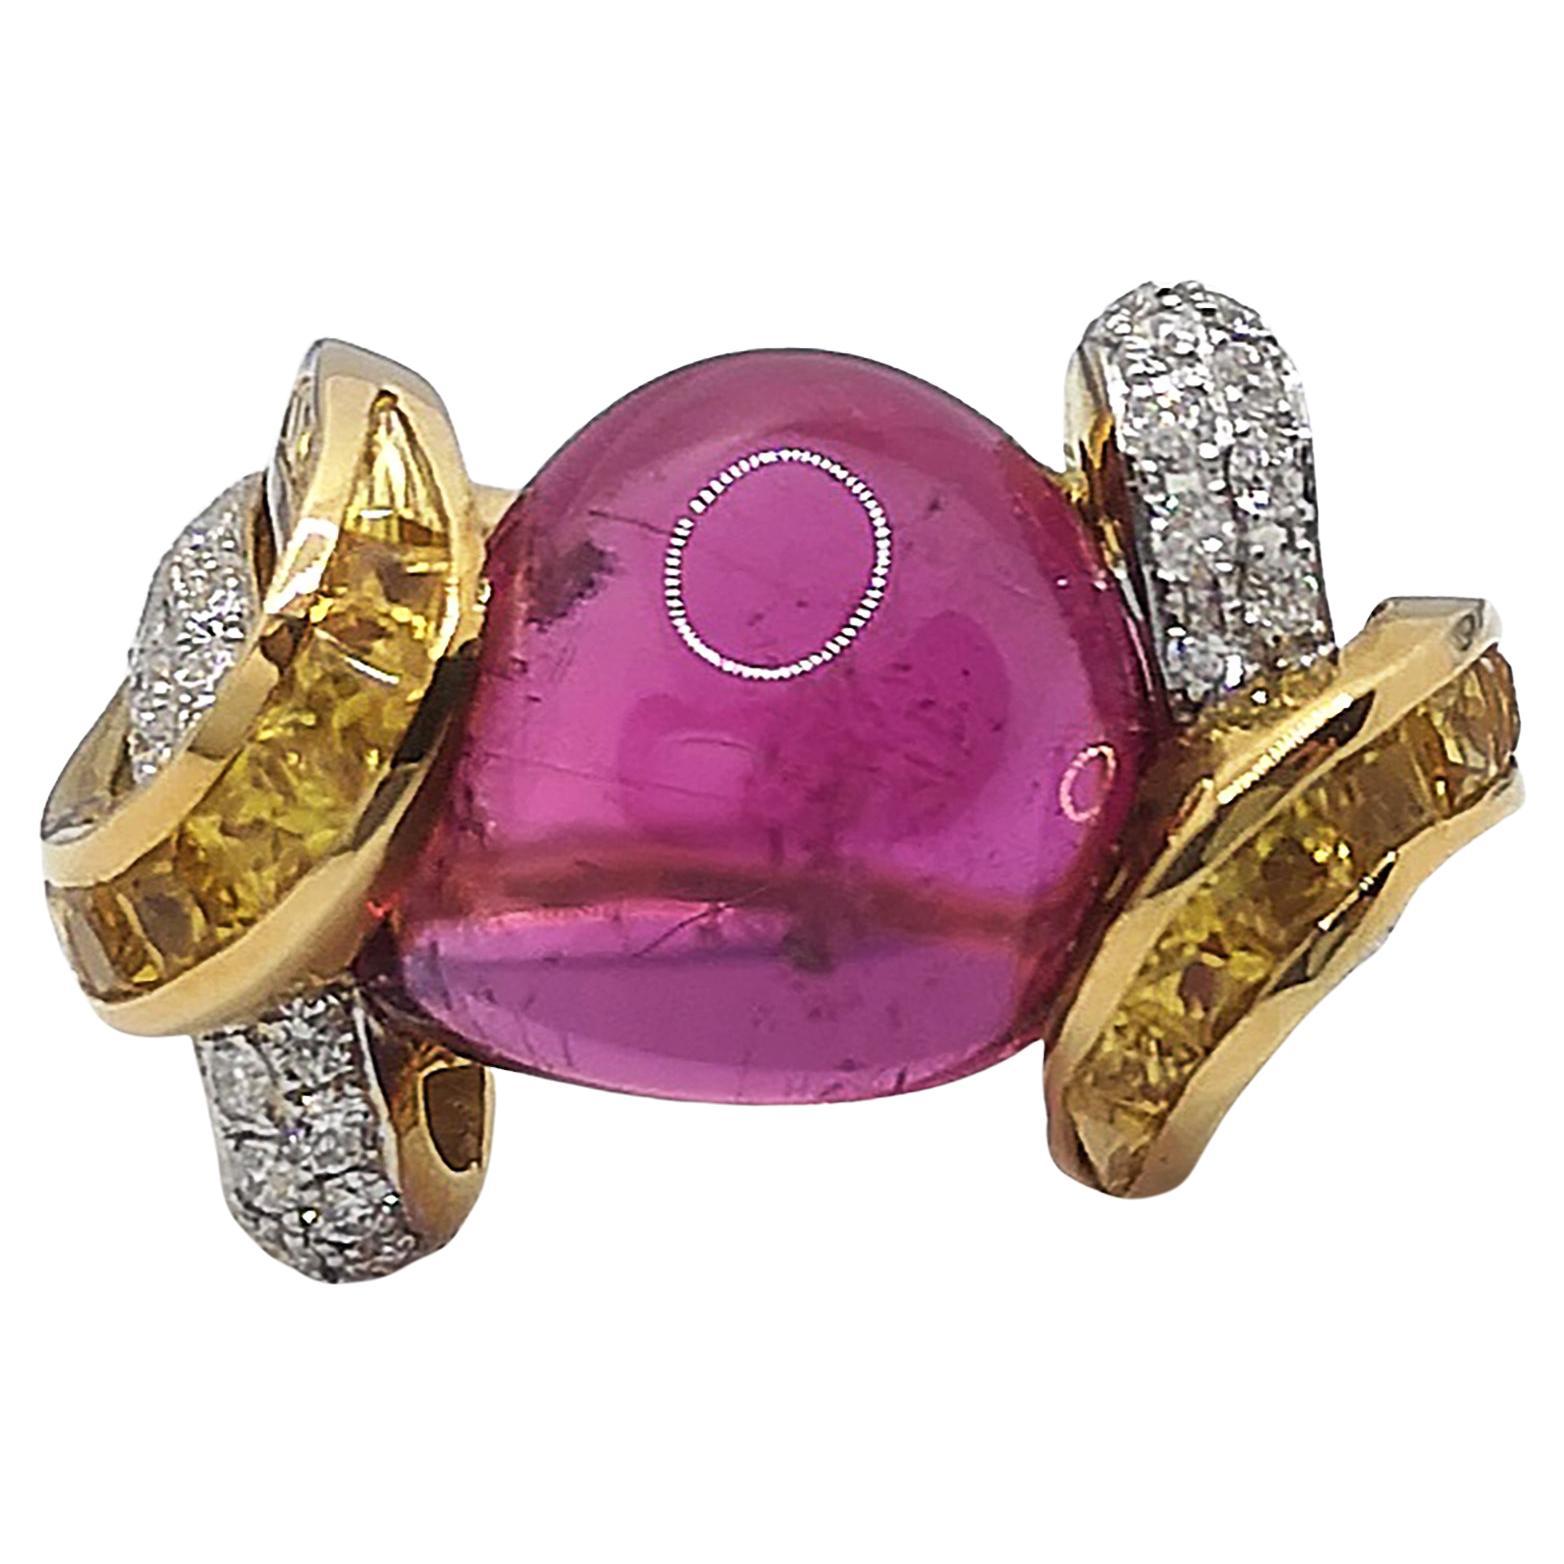 Cabochon Pink Tourmaline 11.94 carats with Diamond 0.69 carat and Yellow Sapphire 5.29 carats Ring set in 18 Karat Gold Settings

Width:  2.3 cm 
Length: 1.5 cm
Ring Size: 54
Total Weight: 12.1 grams

